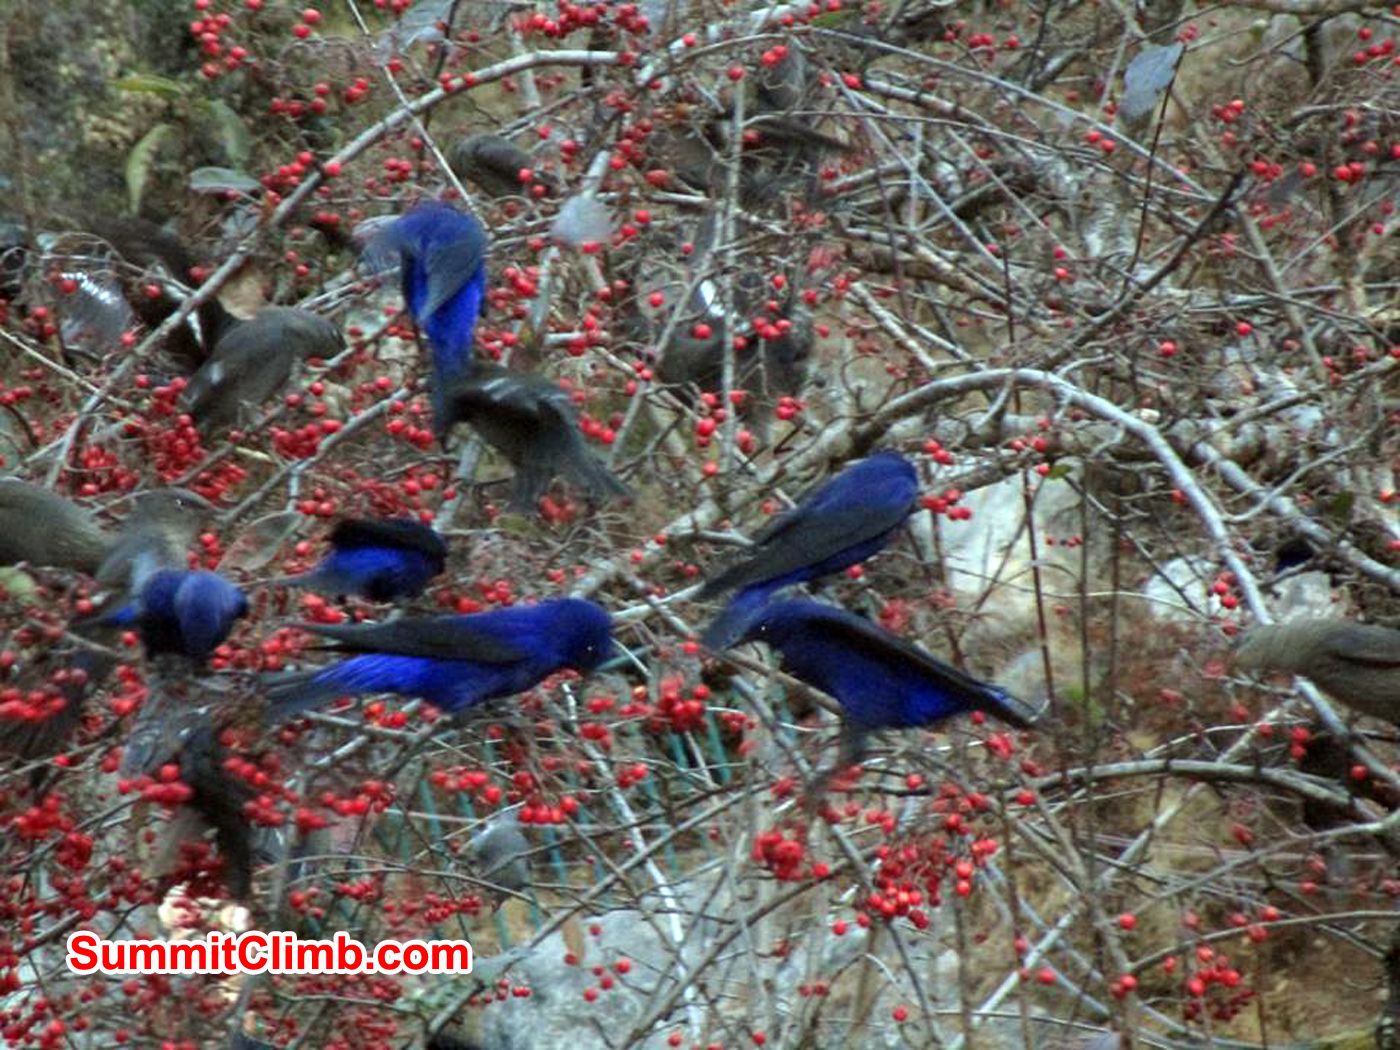 These were crows of some sort, who kept flying up and down the valley, taking these berries back with them. Photo Meryl Lipman